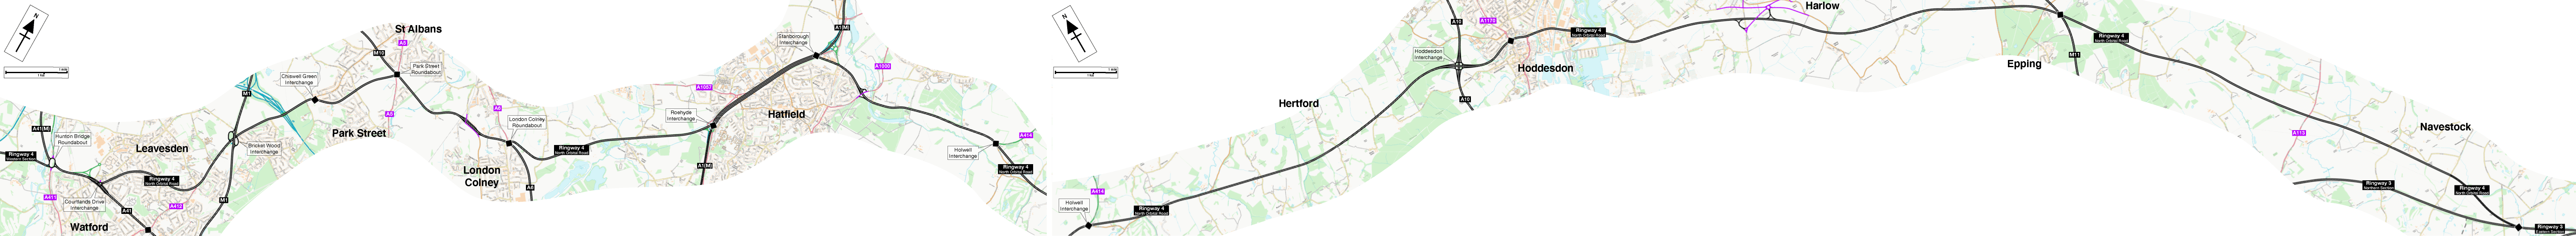 Map of the Ringway 4 North Orbital Road